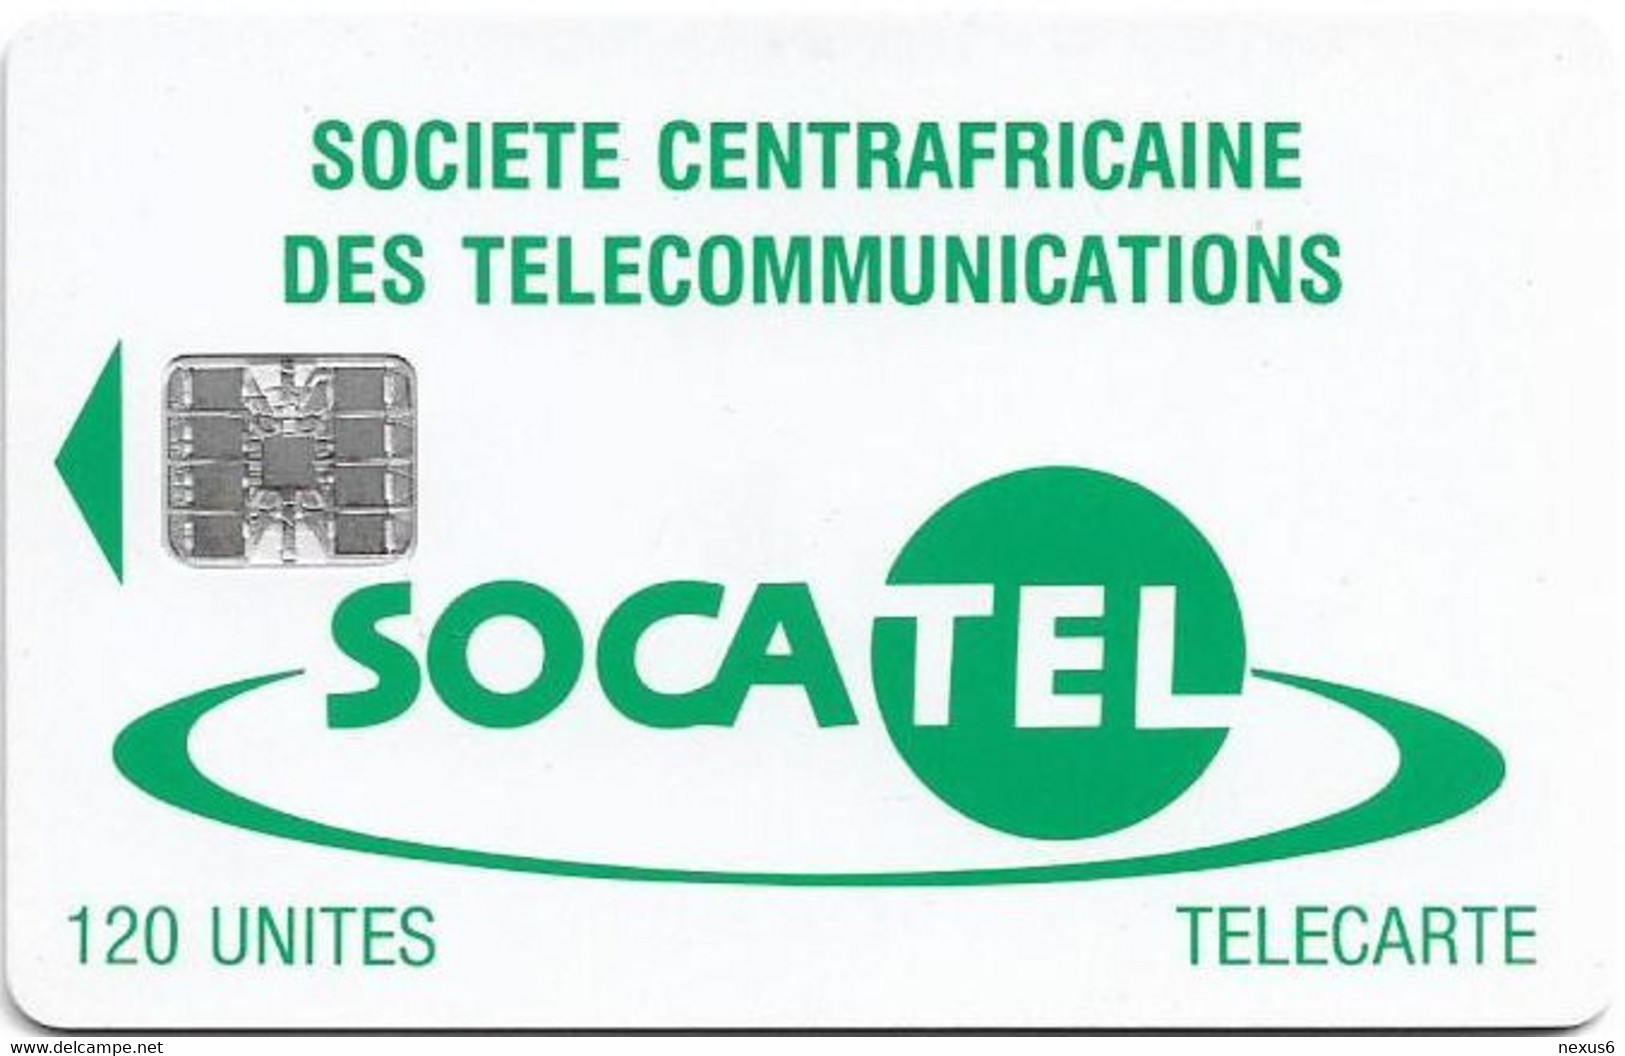 Central African Rep. - Socatel - Logo Green, Without Logo Moreno And Control Num, SC7, 120Units, Used - Repubblica Centroafricana